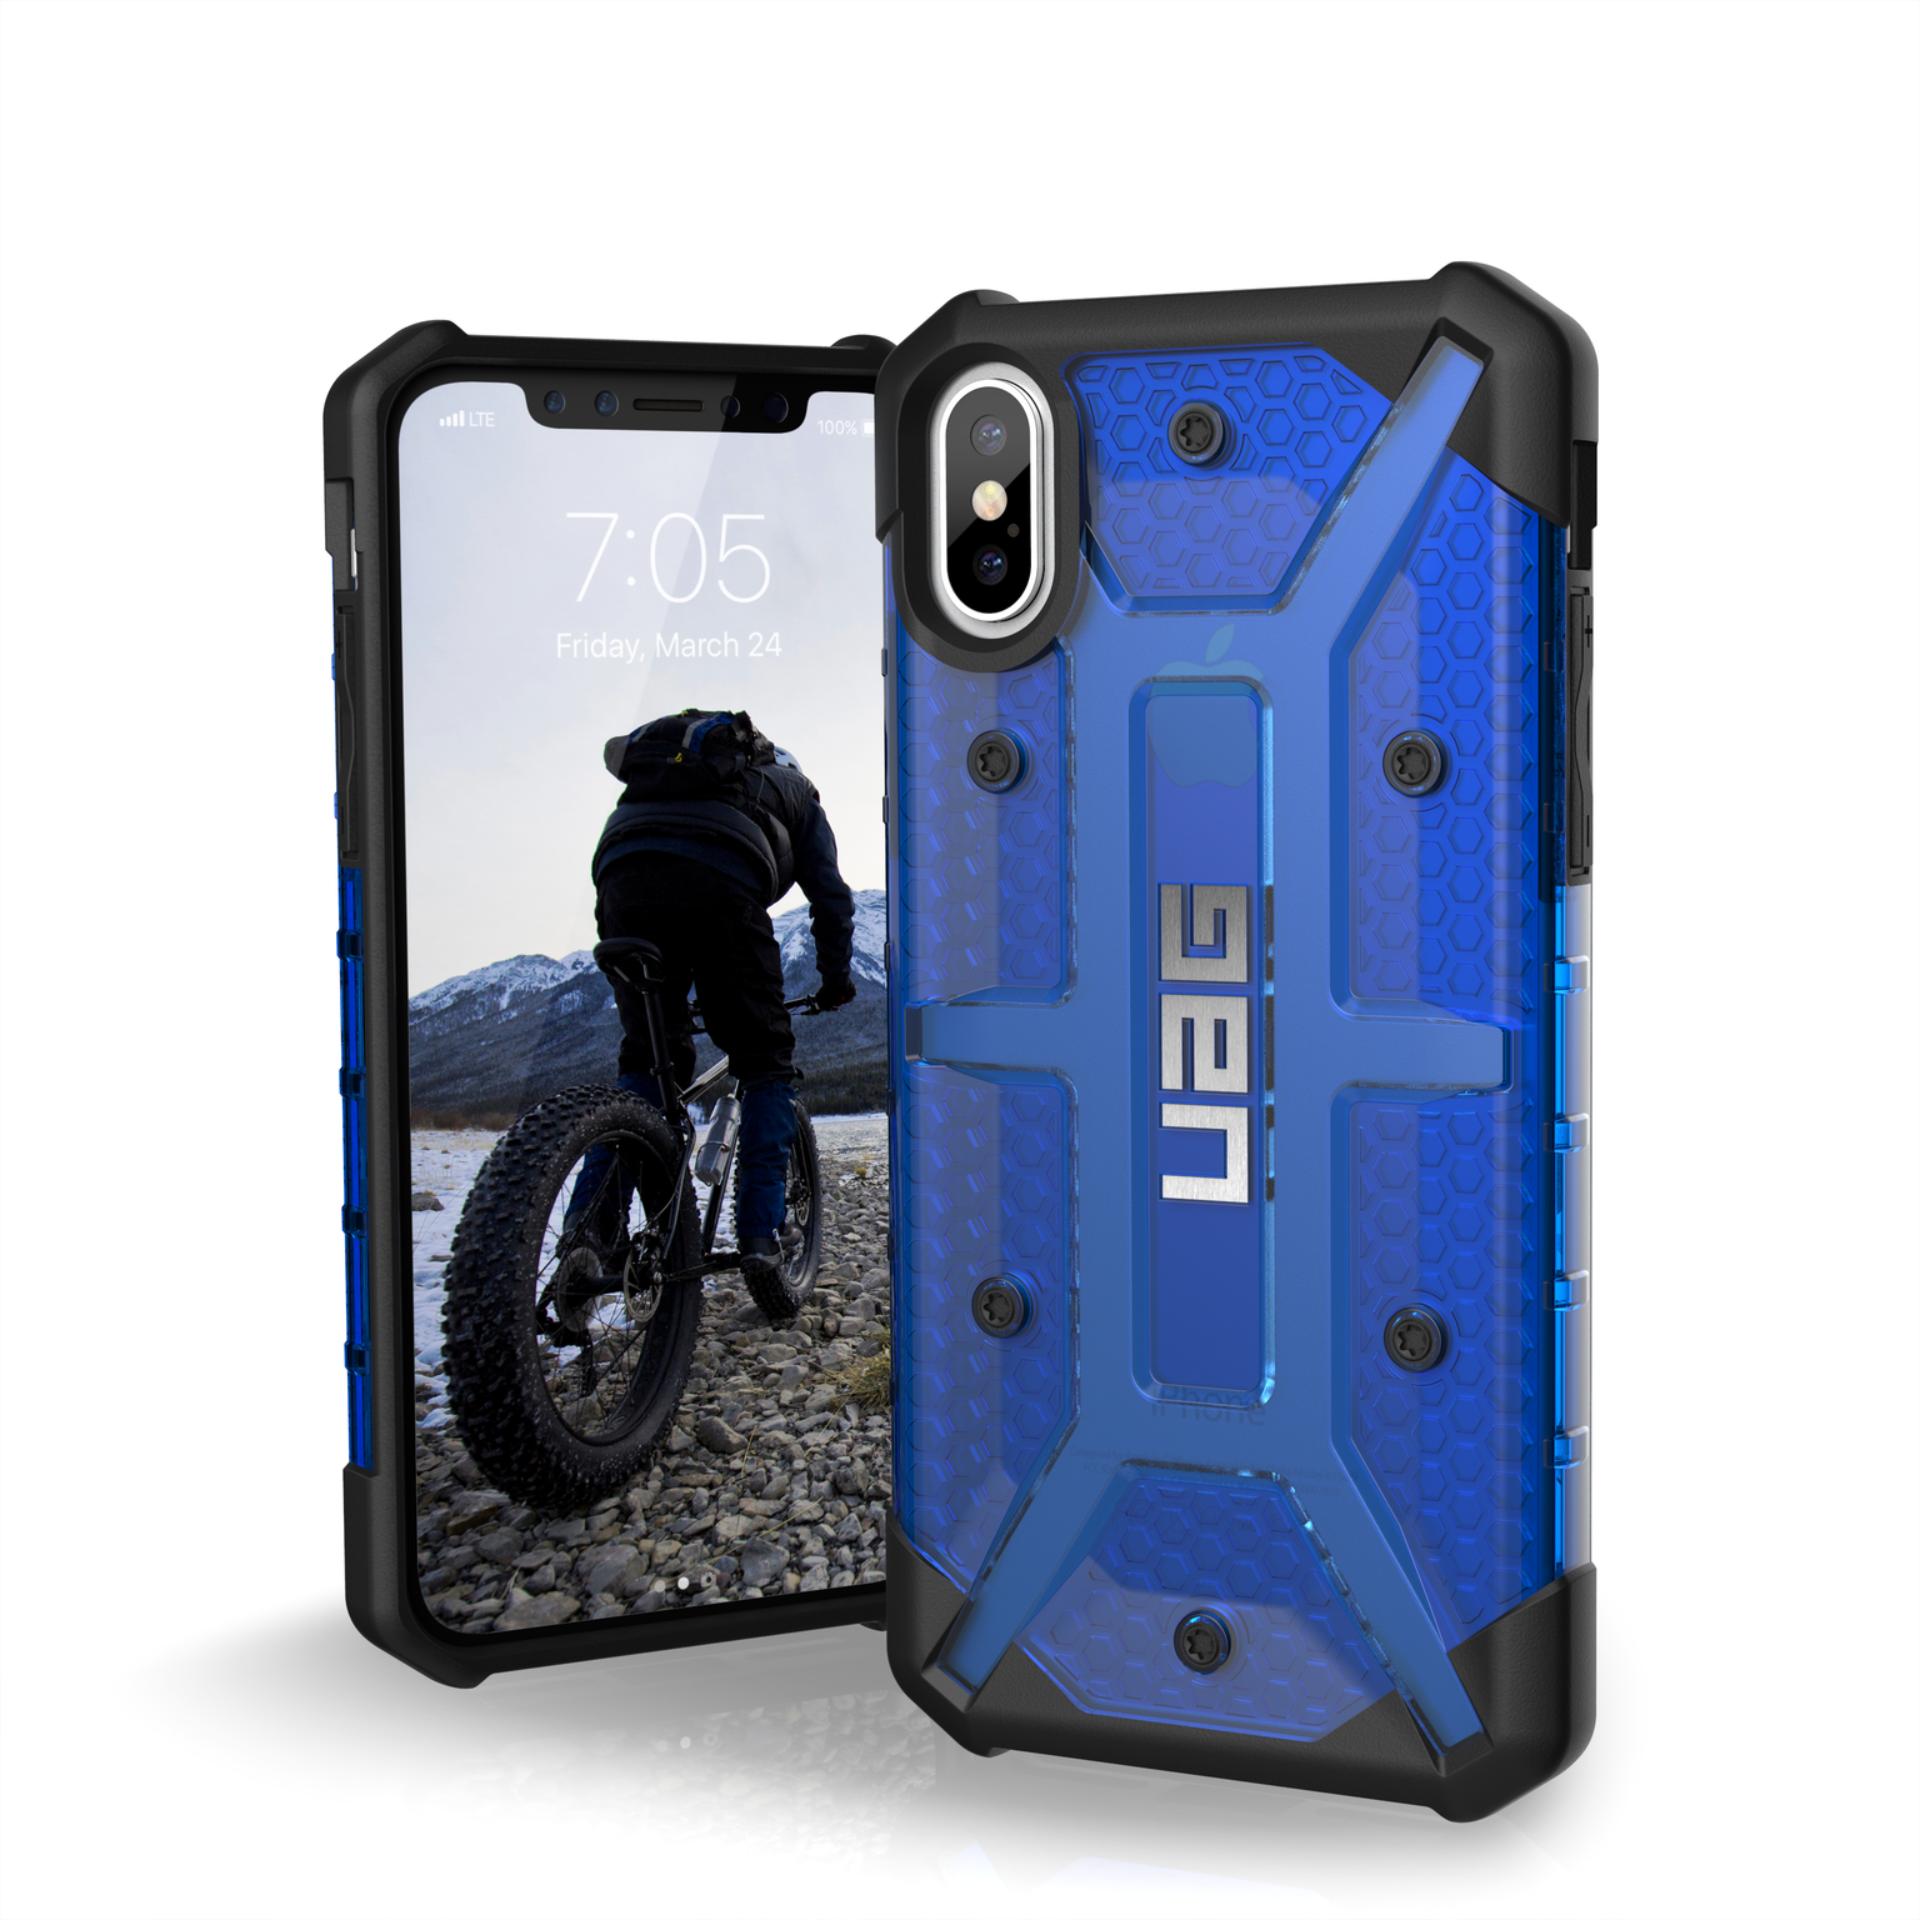 UAG PLASMA SERIES IPHONE X CASE Compatible with iPhone Xs / iPhone X (5.8-inch)